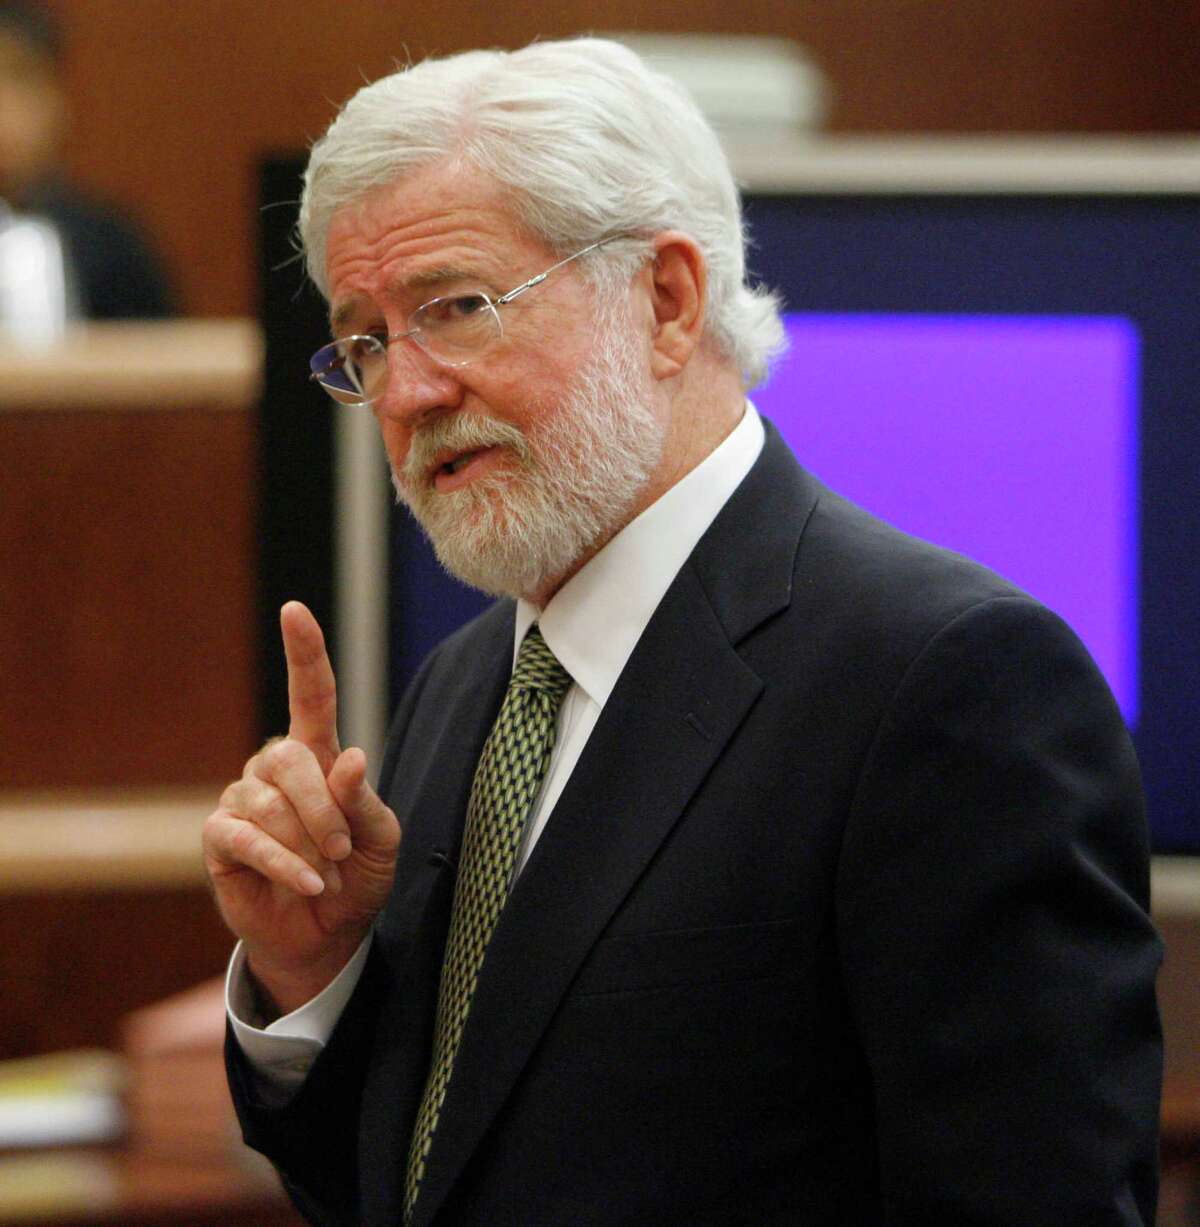 George Parnham, attorney for Andrea Yates, gestures during the closing arguments in Yates' trial Monday, July 24, 2006, in Houston. Jurors began deliberating in Andrea Yates' second murder trial Monday to determine if she knew that drowning her five children in the bathtub was wrong. (AP Photo/Brett Coomer, Pool)